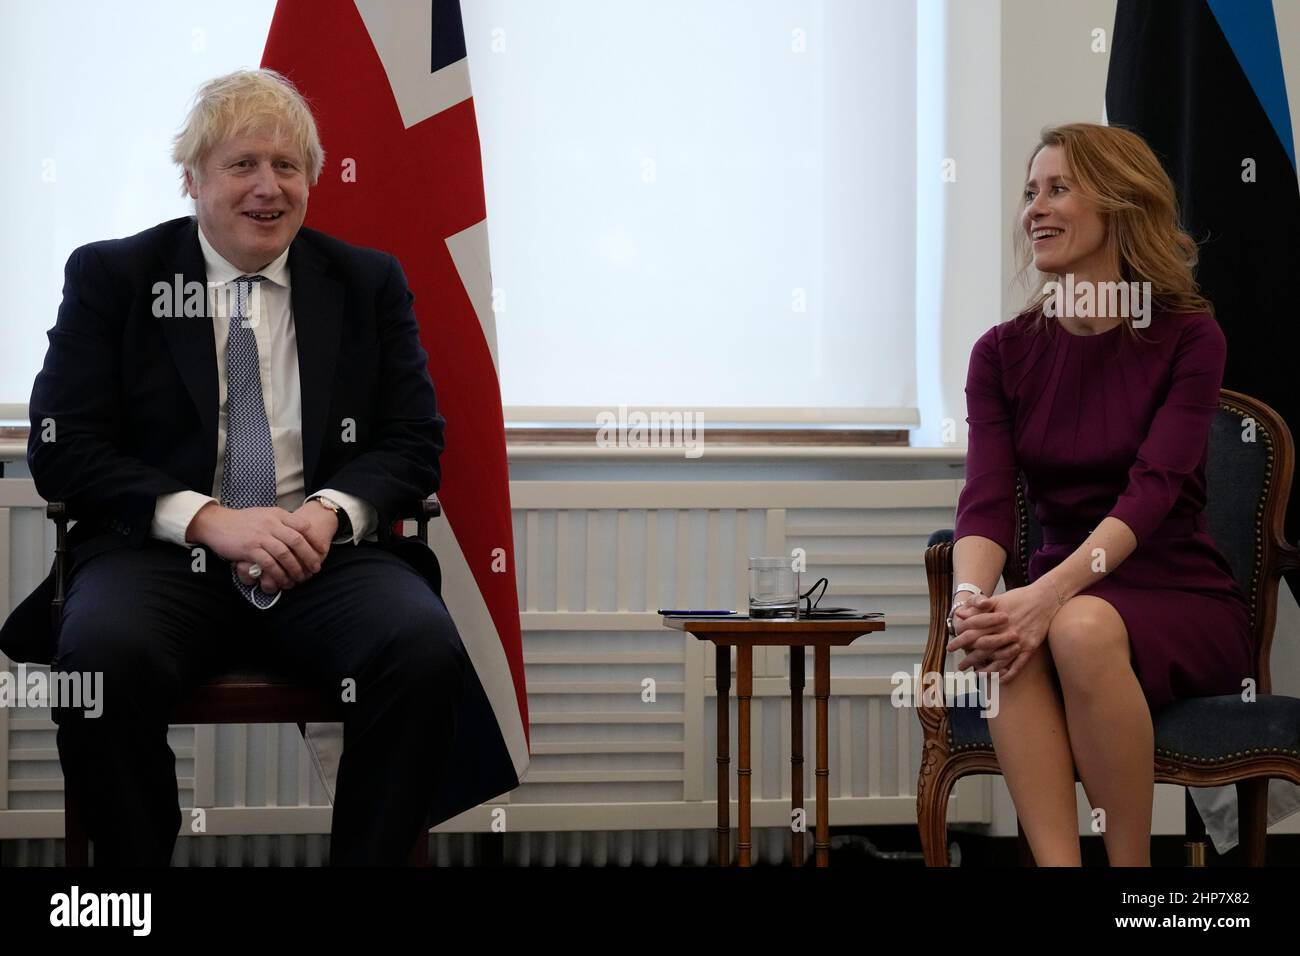 Prime Minister Boris Johnson meets with Estonia's Prime Minister Kaja Kallas at the Munich Security Conference in Germany where the he is meeting with world leaders to discuss tensions in eastern Europe. Picture date: Saturday February 19, 2022. Stock Photo